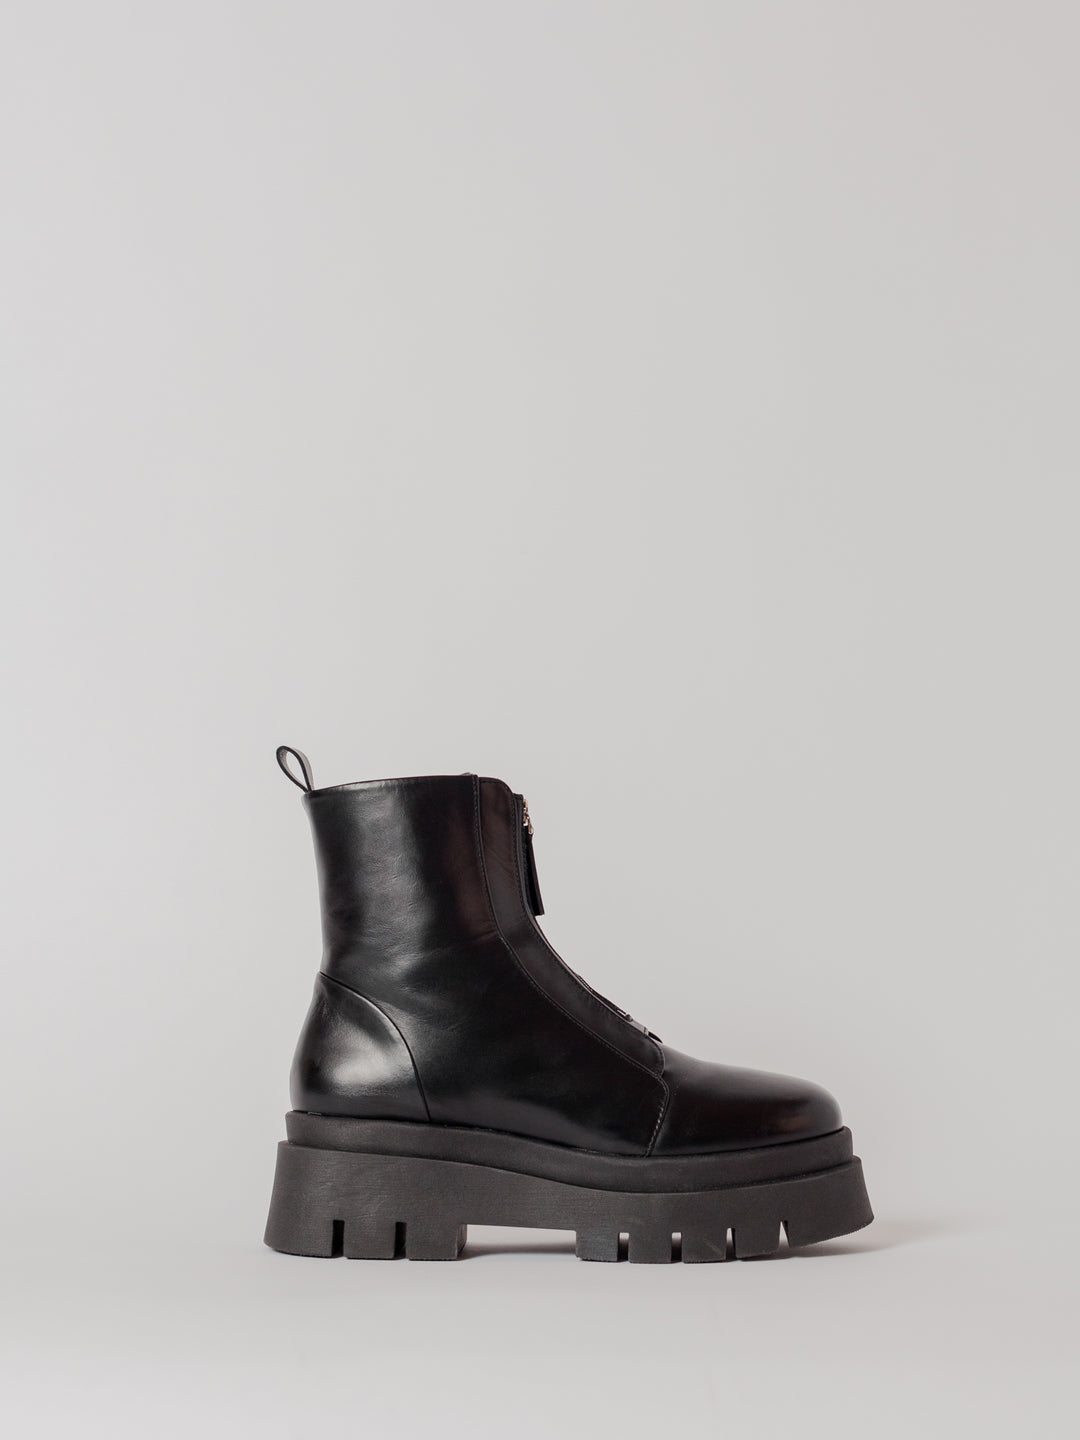 Blankens The Thilda. chunky sole, zipper in front. black leather. 